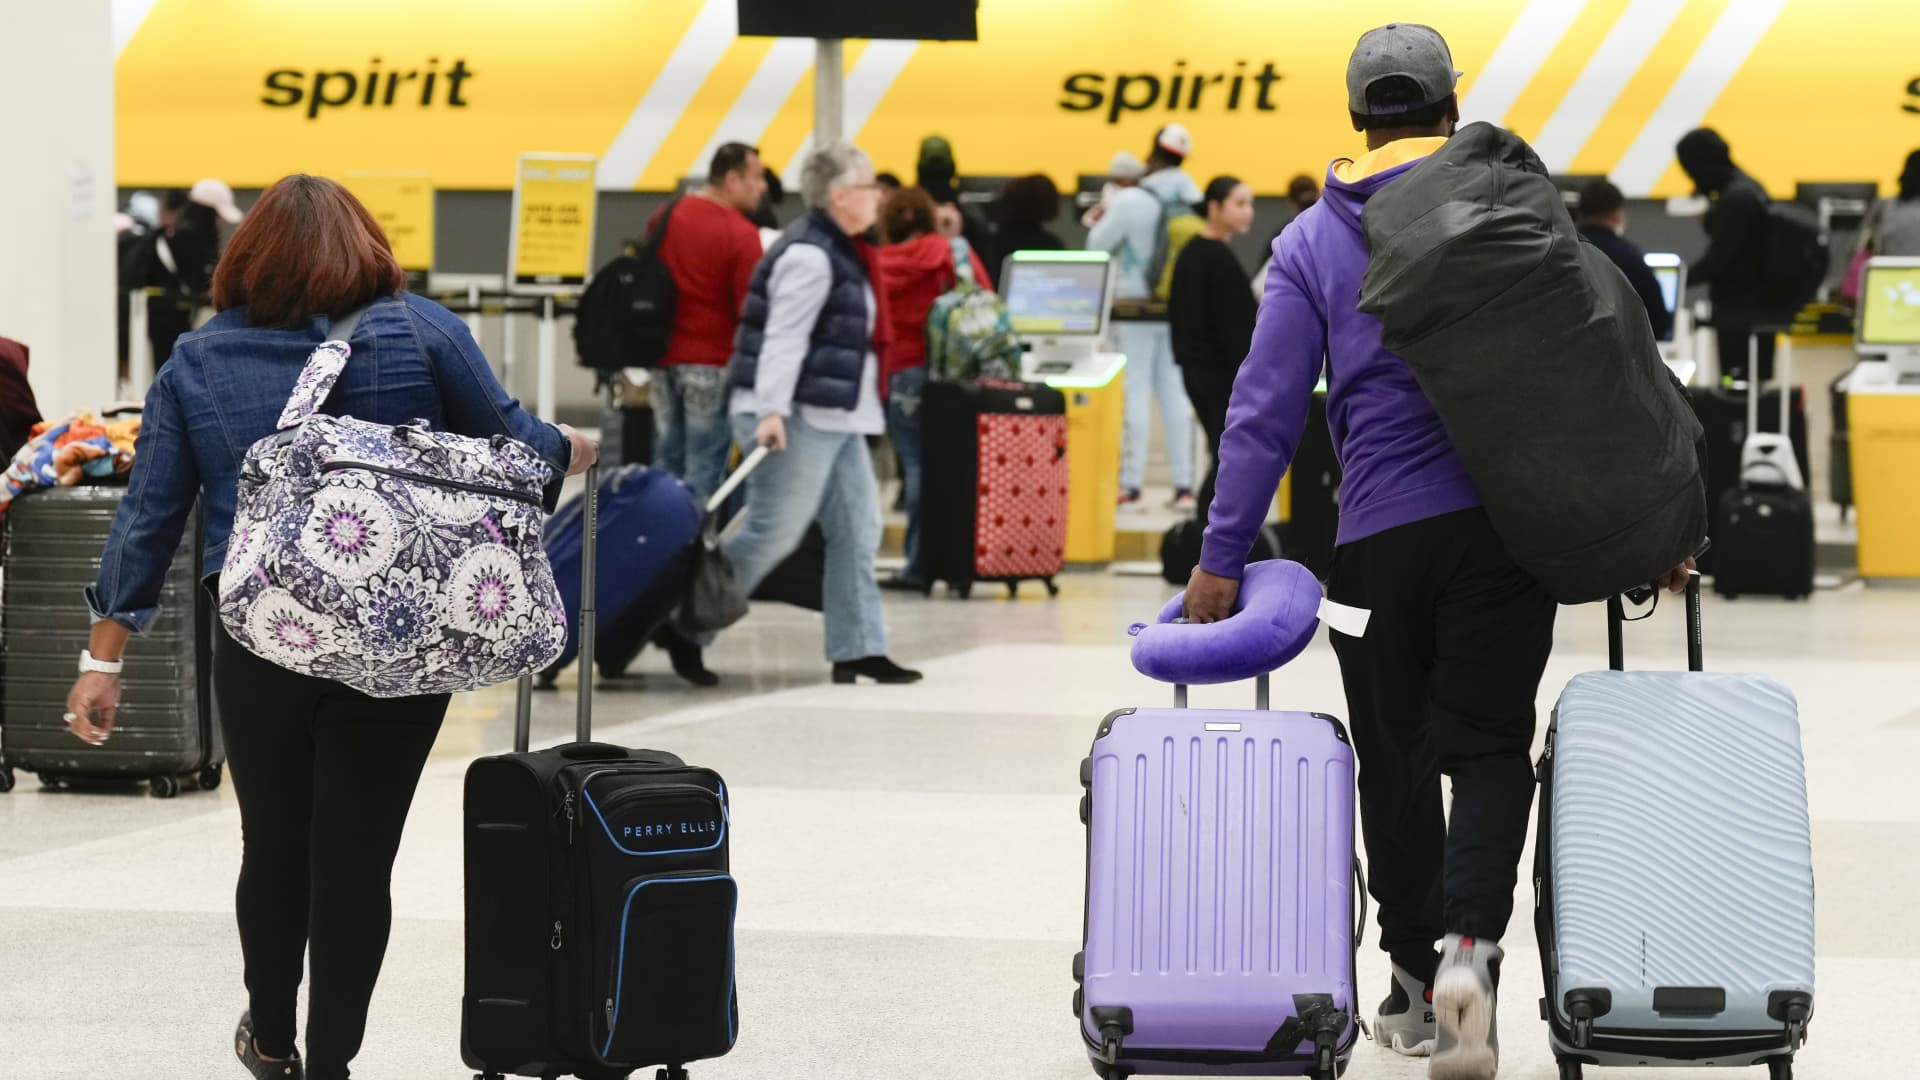 HOUSTON, TEXAS - NOVEMBER 21: Travelers wheel luggage toward Spirit Airlines check-in desk at George Bush Intercontinental Airport, Tuesday, Nov. 21, 2023, in Houston. (Jason Fochtman/Houston Chronicle via Getty Images)